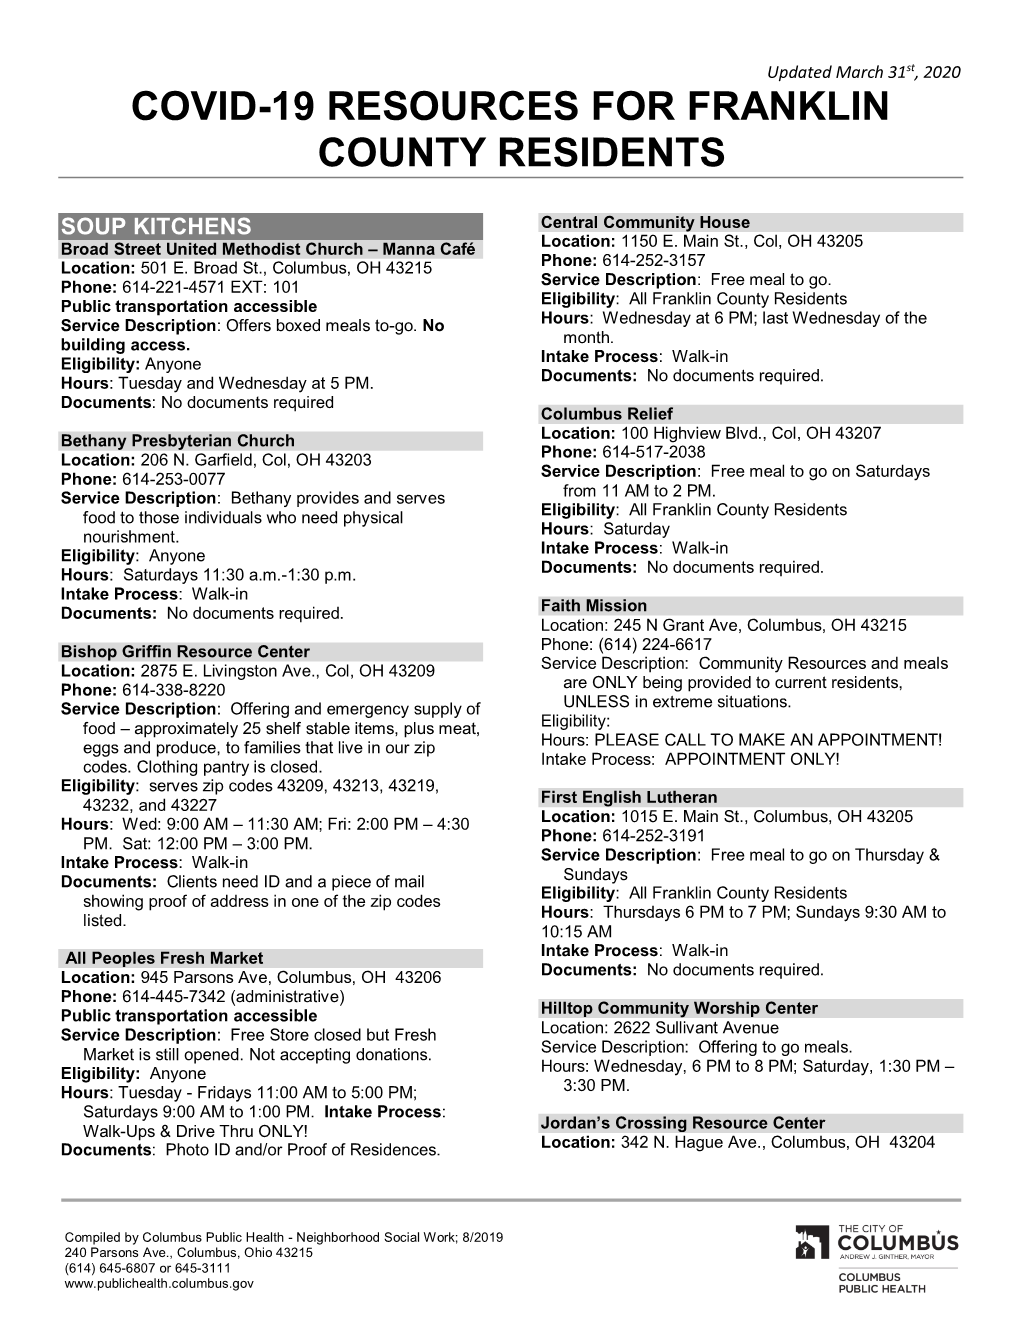 Covid-19 Resources for Franklin County Residents